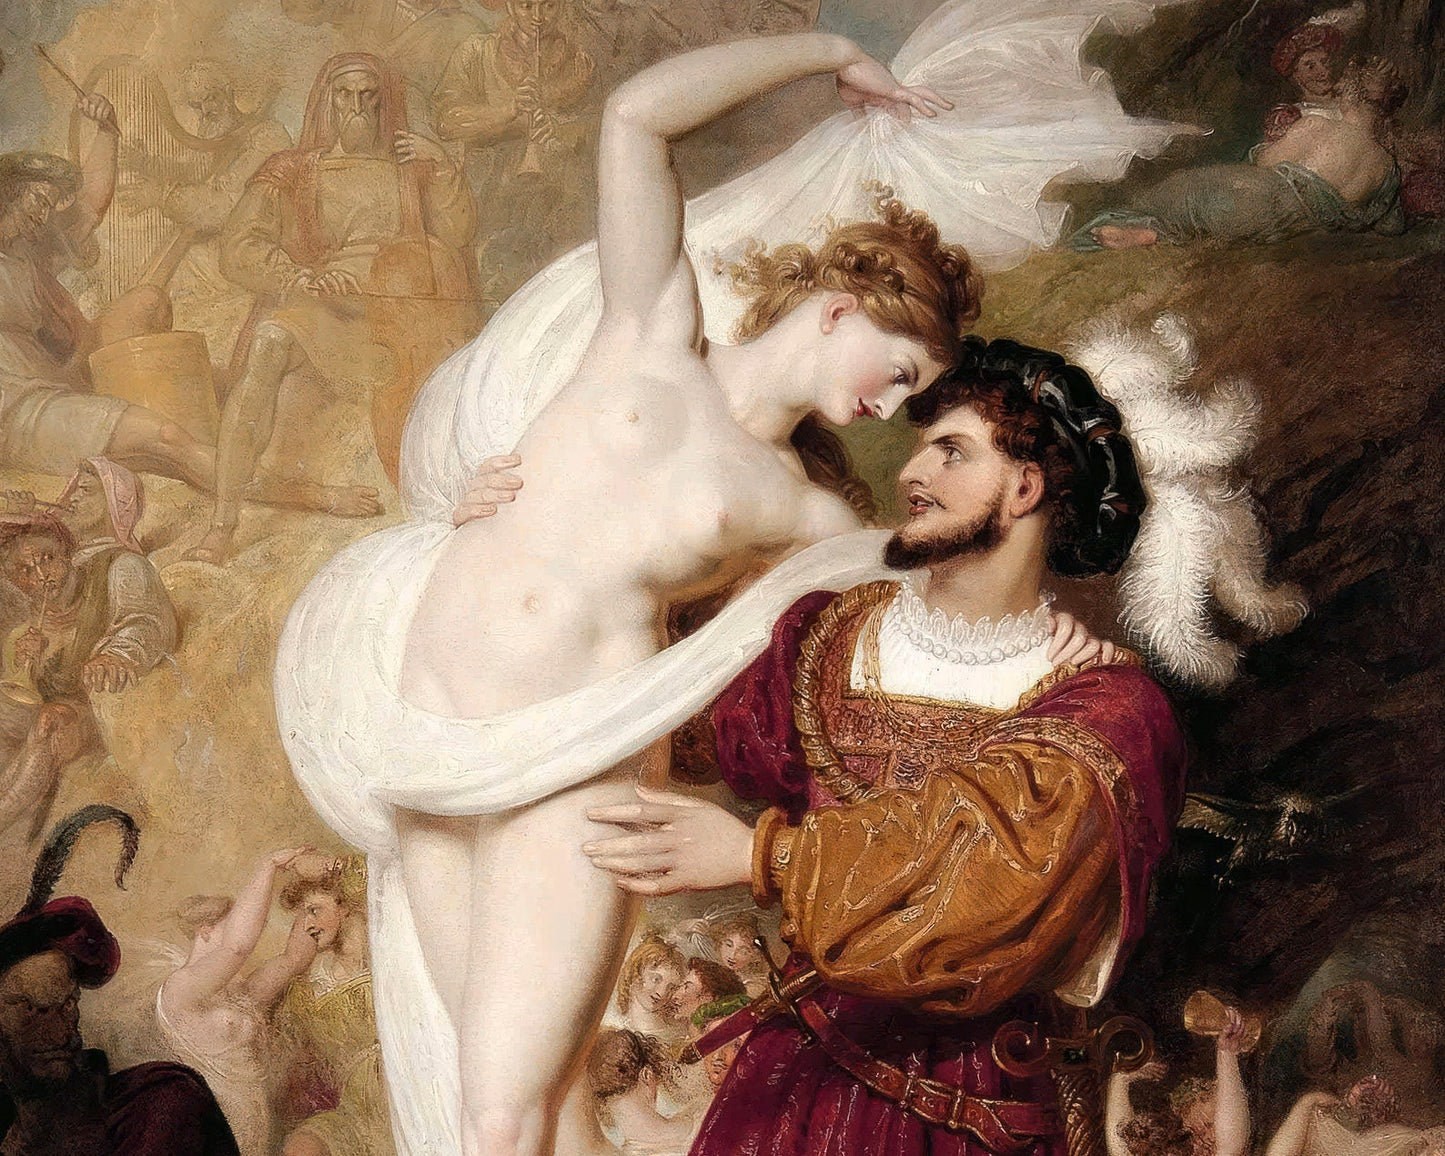 Richard Westall "Faust and Lilith" (c.1831) - Mabon Gallery